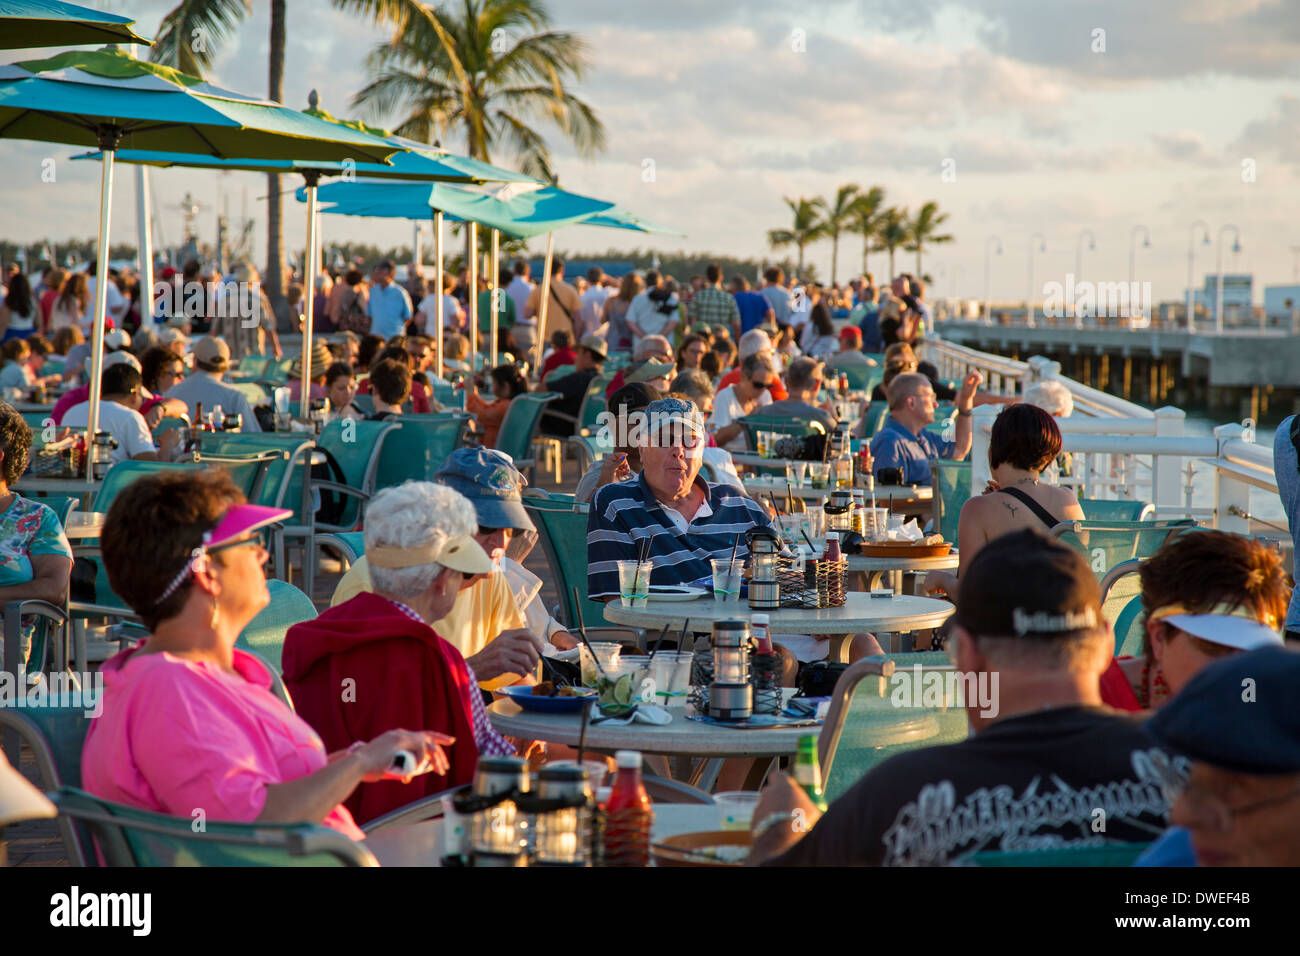 Key West, Florida - Tourists gather at a restaurant in Mallory Square to watch the sunset. Stock Photo